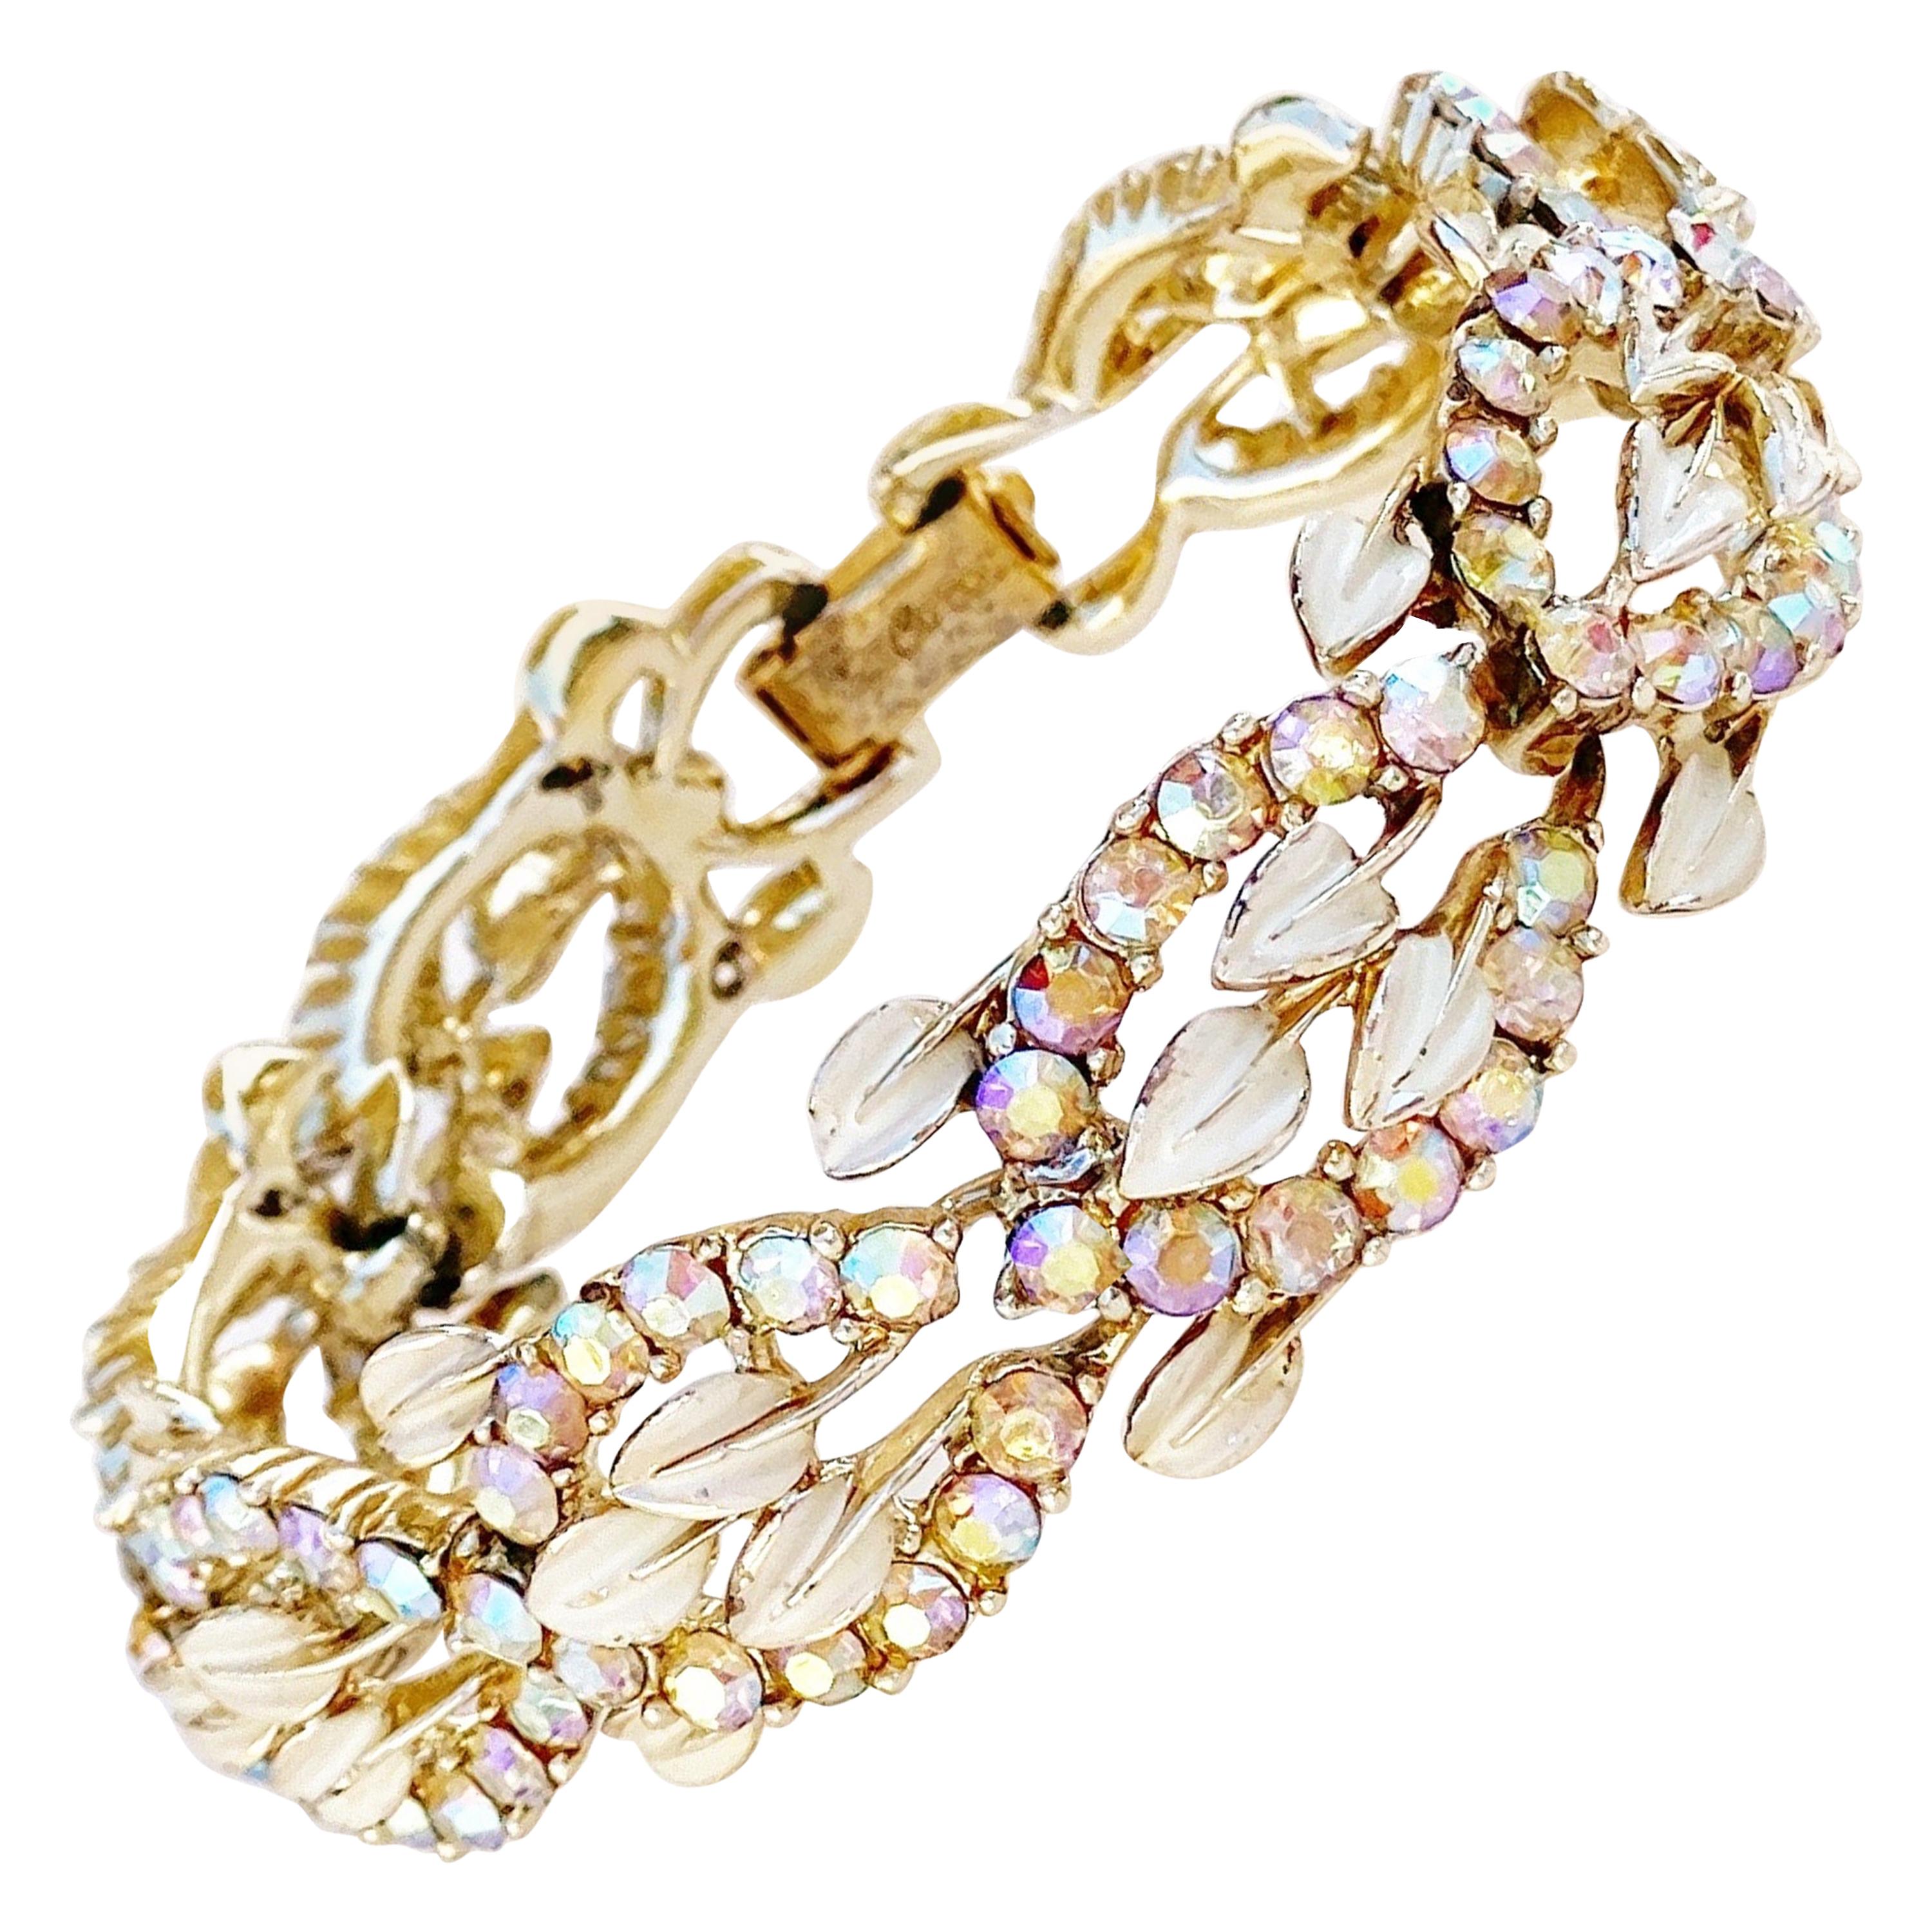 Faux Pearls and Stones Vintage 50's Victorian Revival Jeweled  Goldtone Linked Bracelet